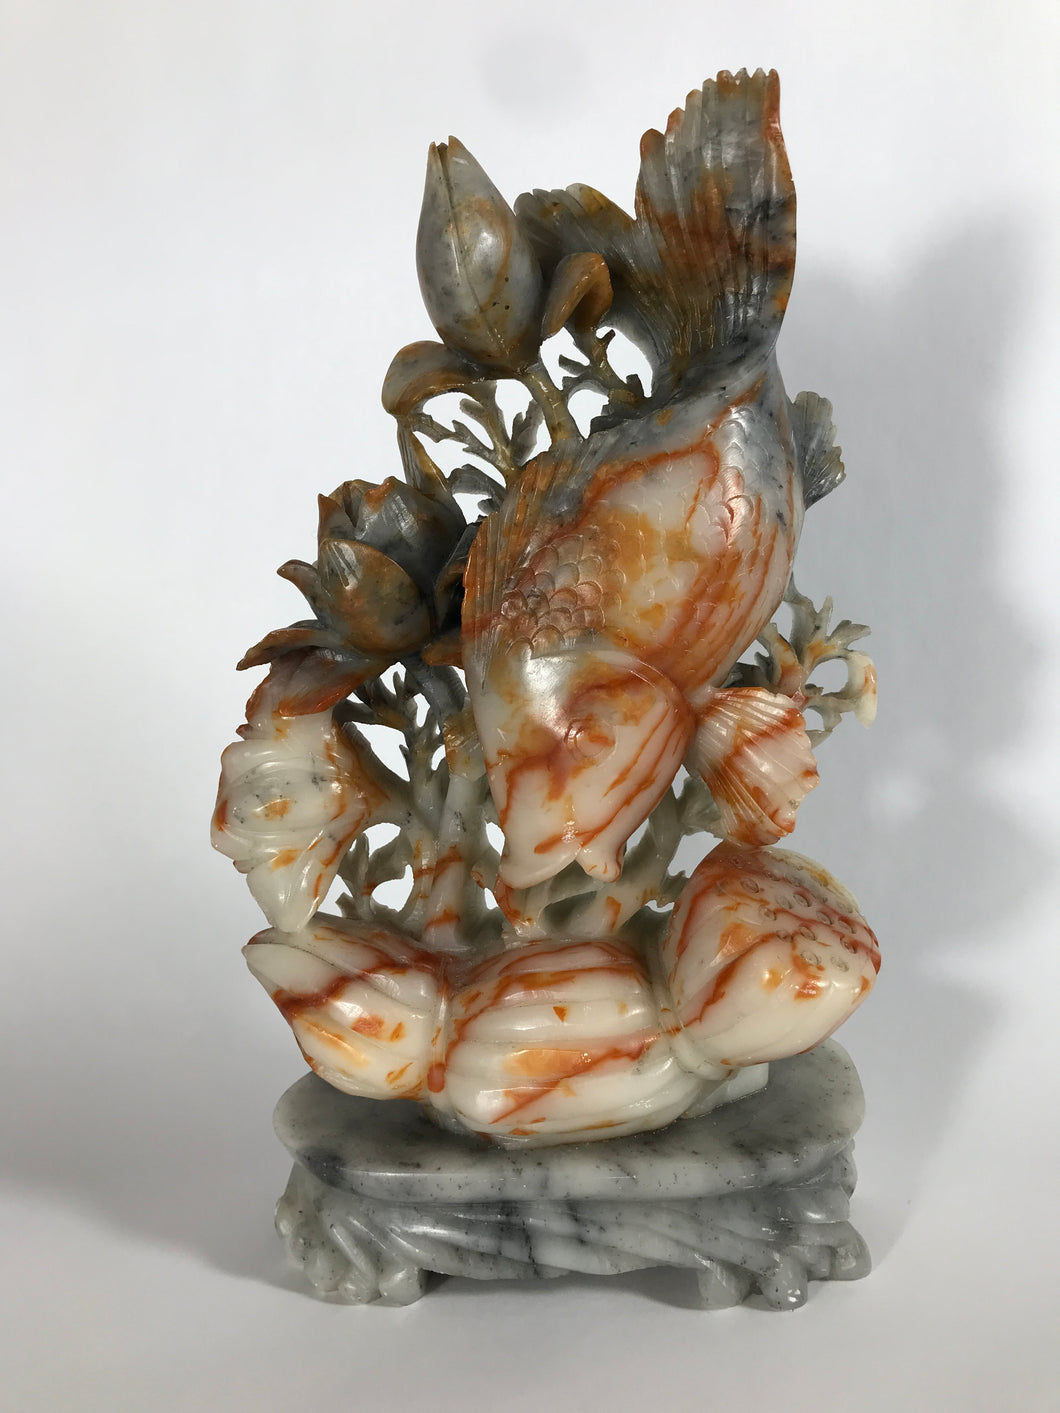 Soapstone Carving: Colorful Soapstone Carving of a Fish and Lotus